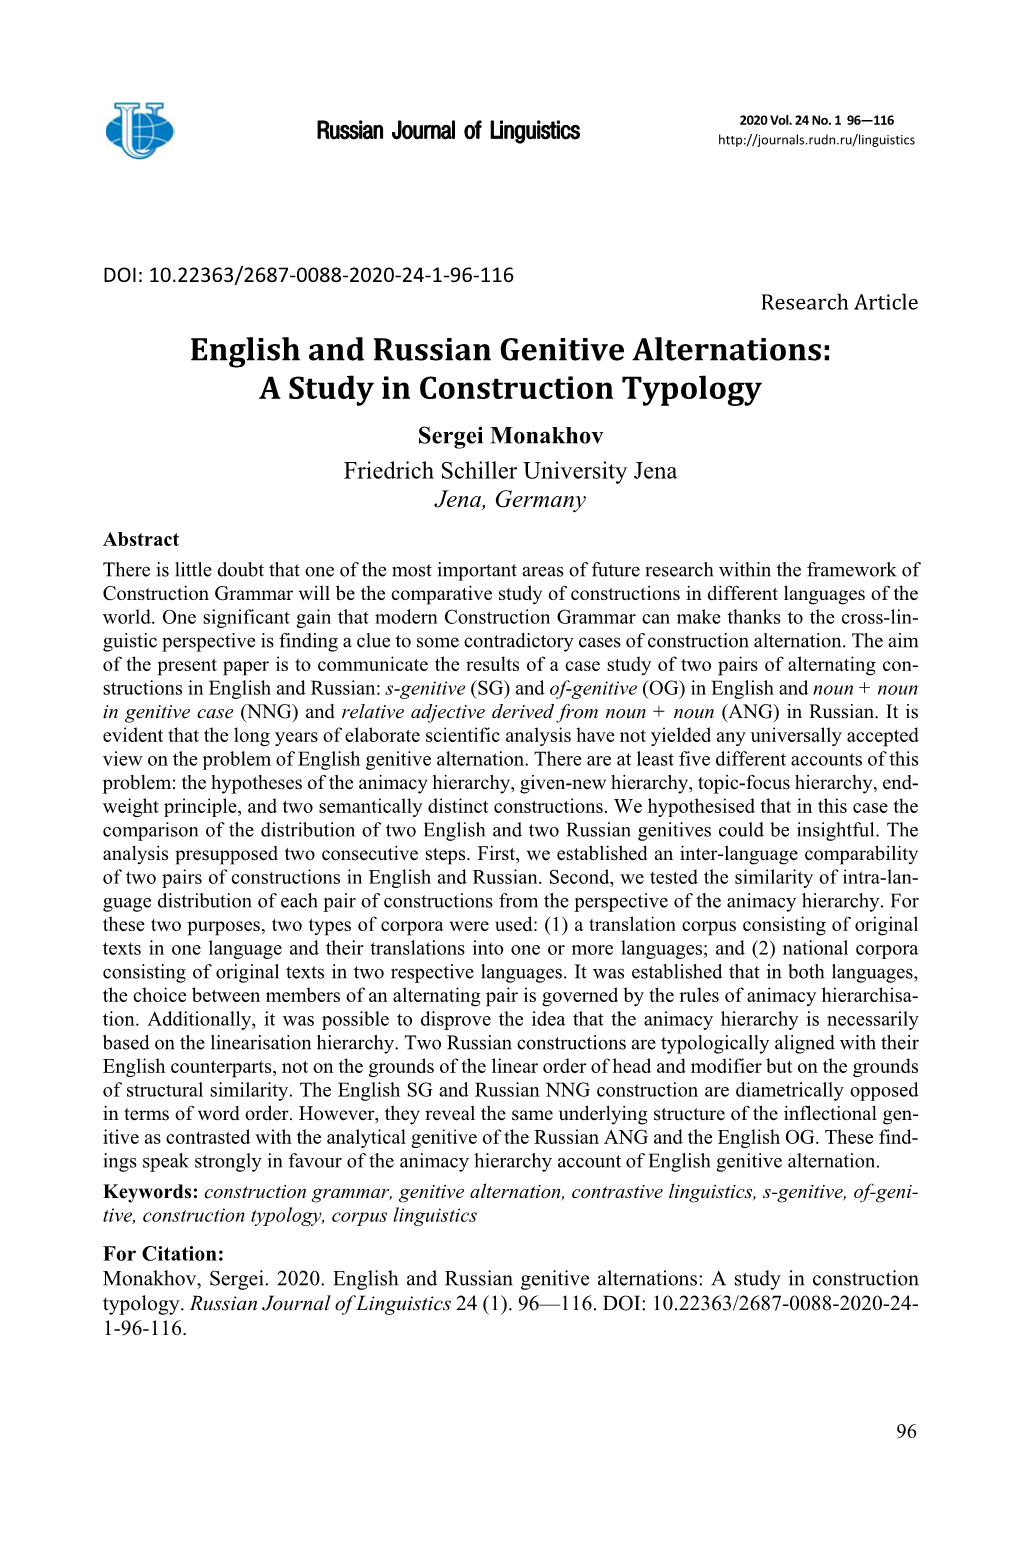 English and Russian Genitive Alternations